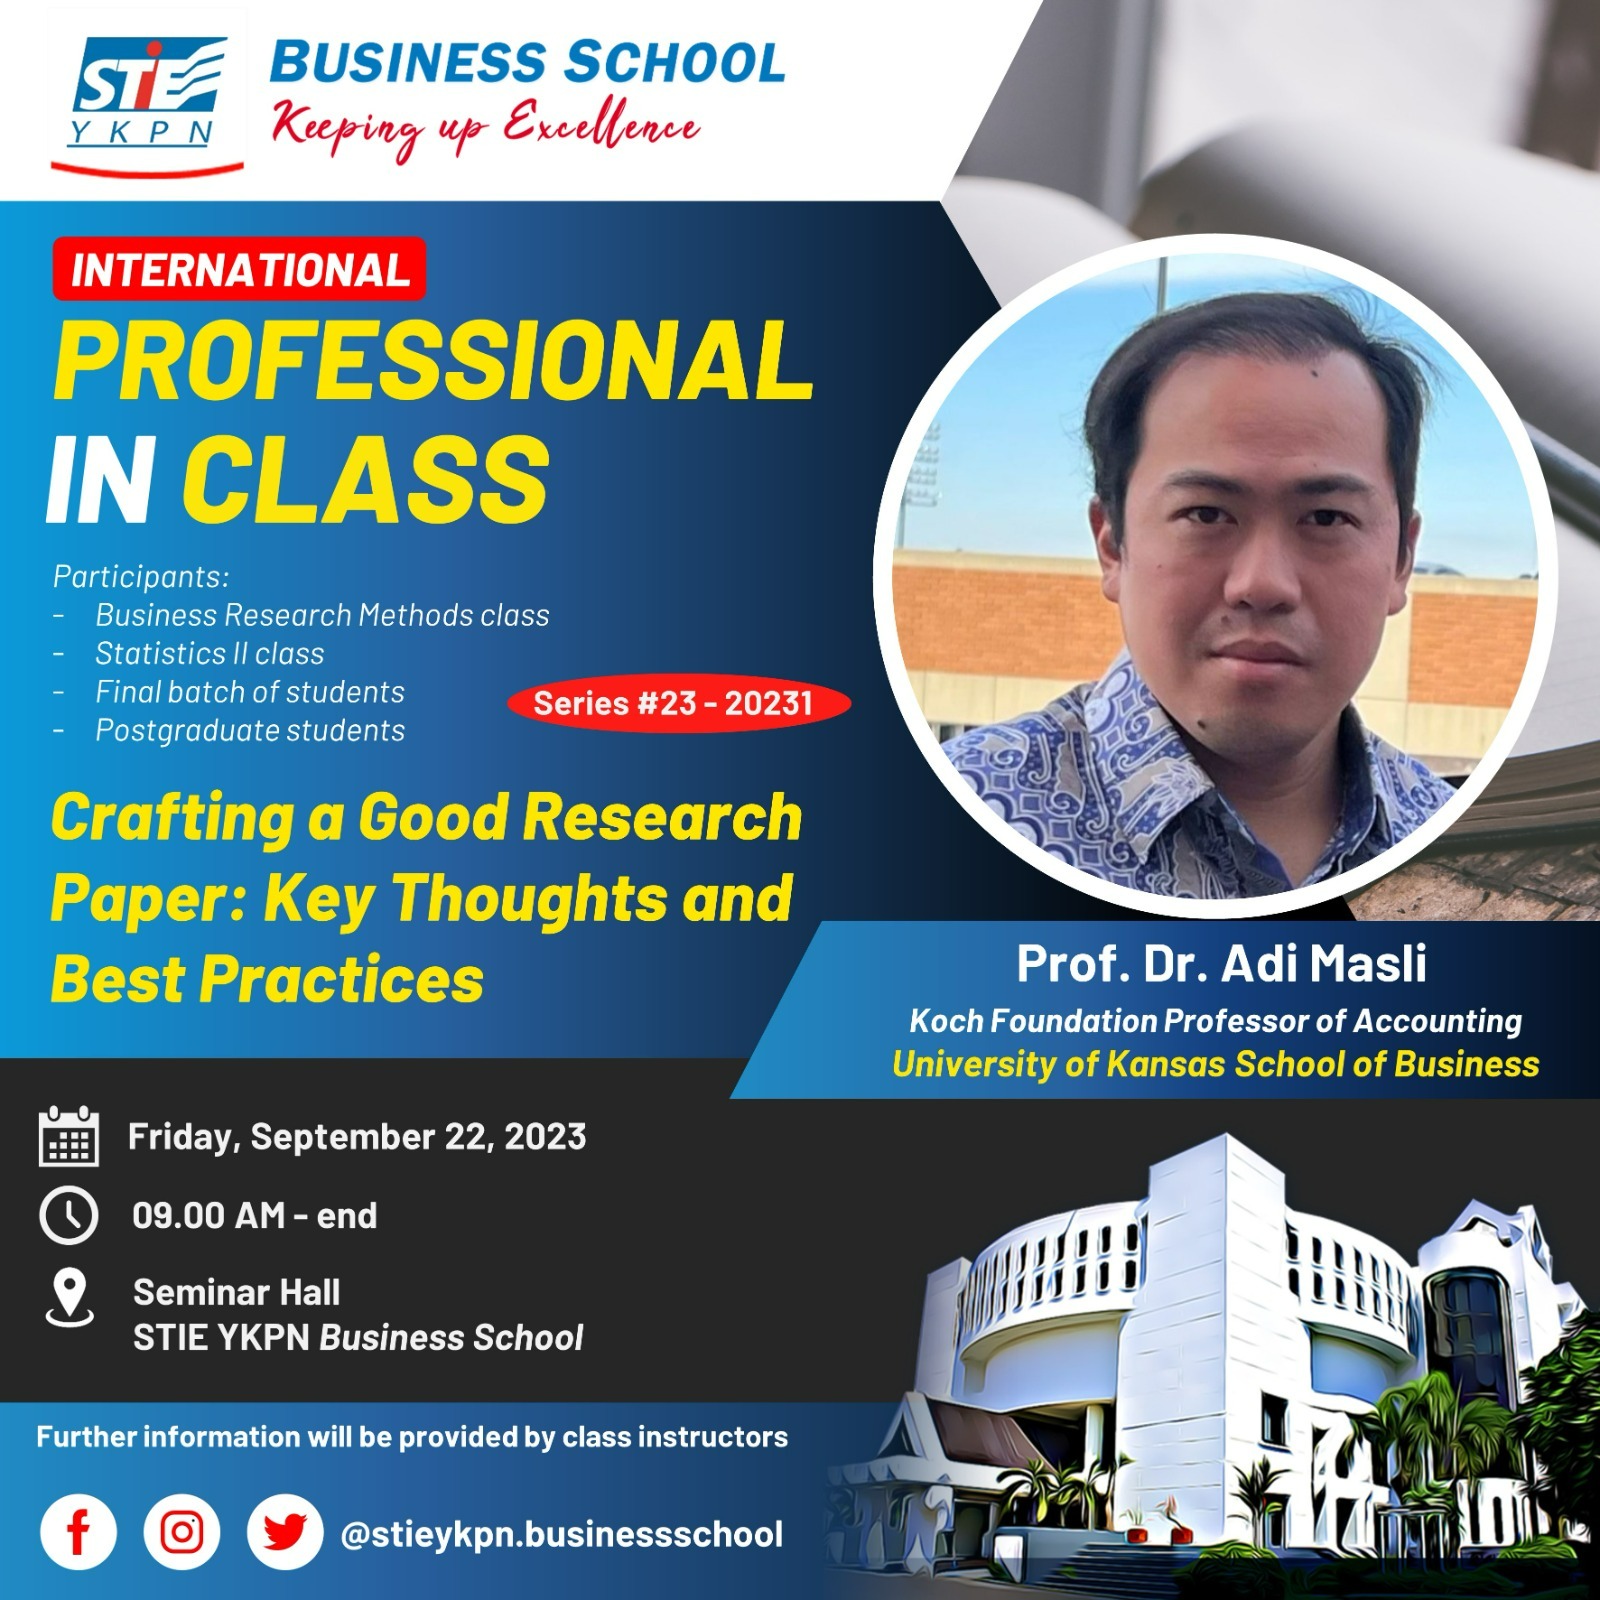 KULIAH UMUM: PROFESSIONAL IN CLASS - Crafting a Good Research Paper: Key Thought and Best Practices